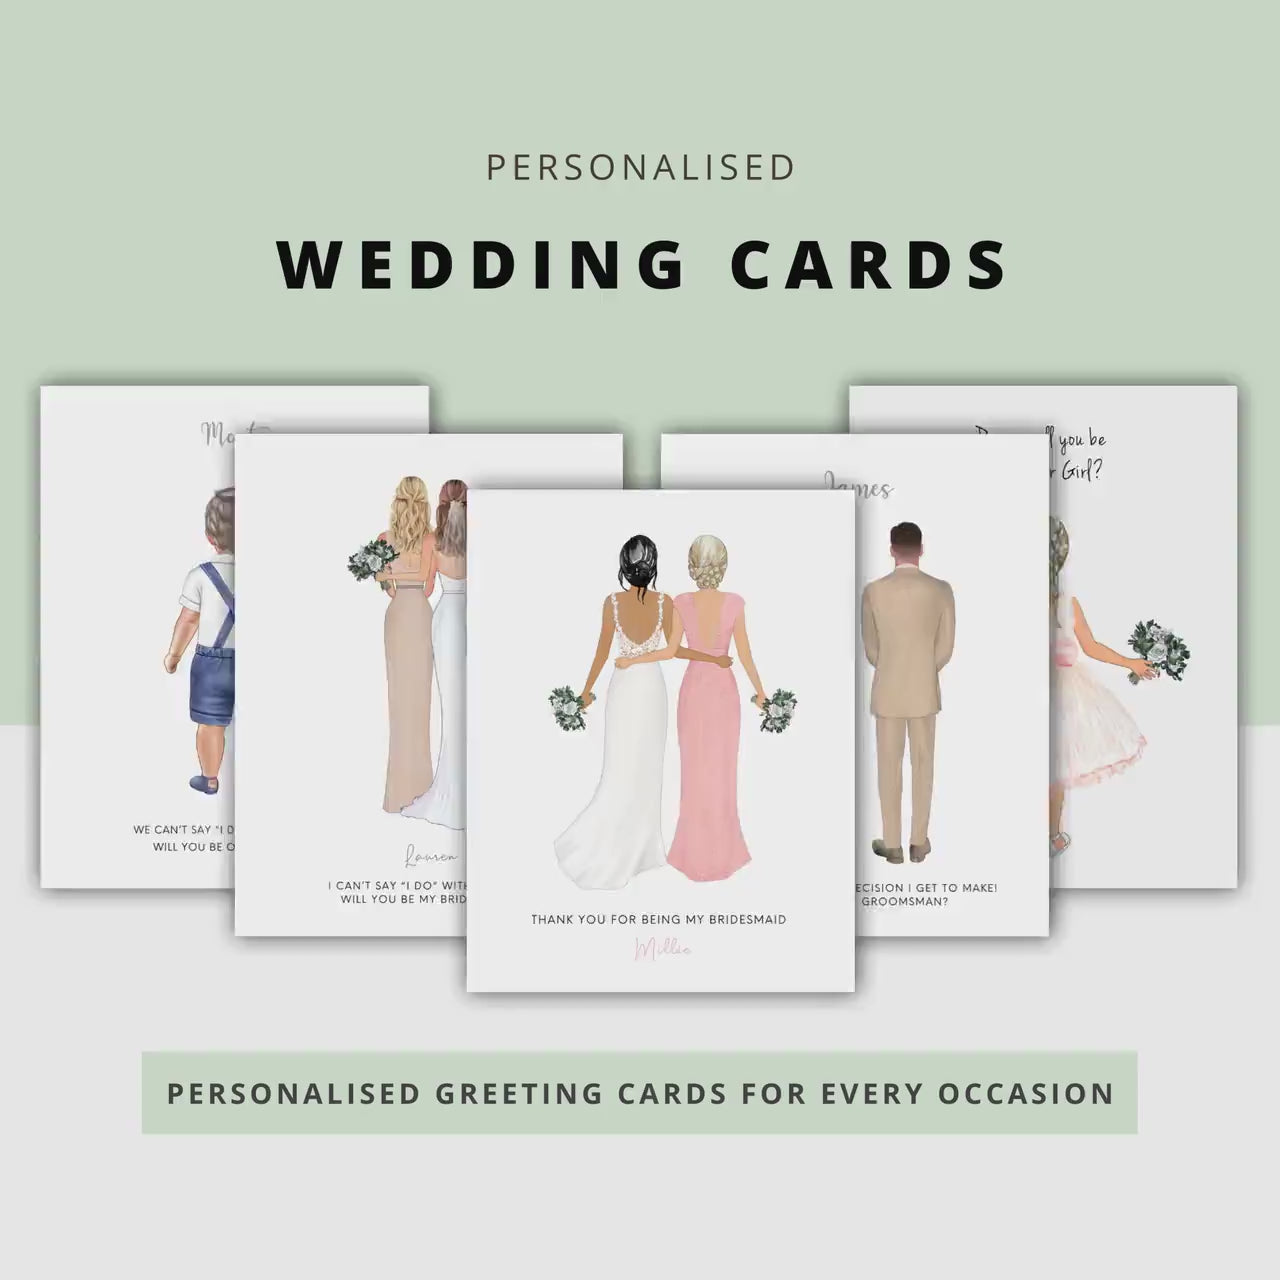 Personalised Will You Be Our Witness Wedding Card, Wedding Request Card, Personalised Wedding Witness Card, Witness Wedding Card, Witness